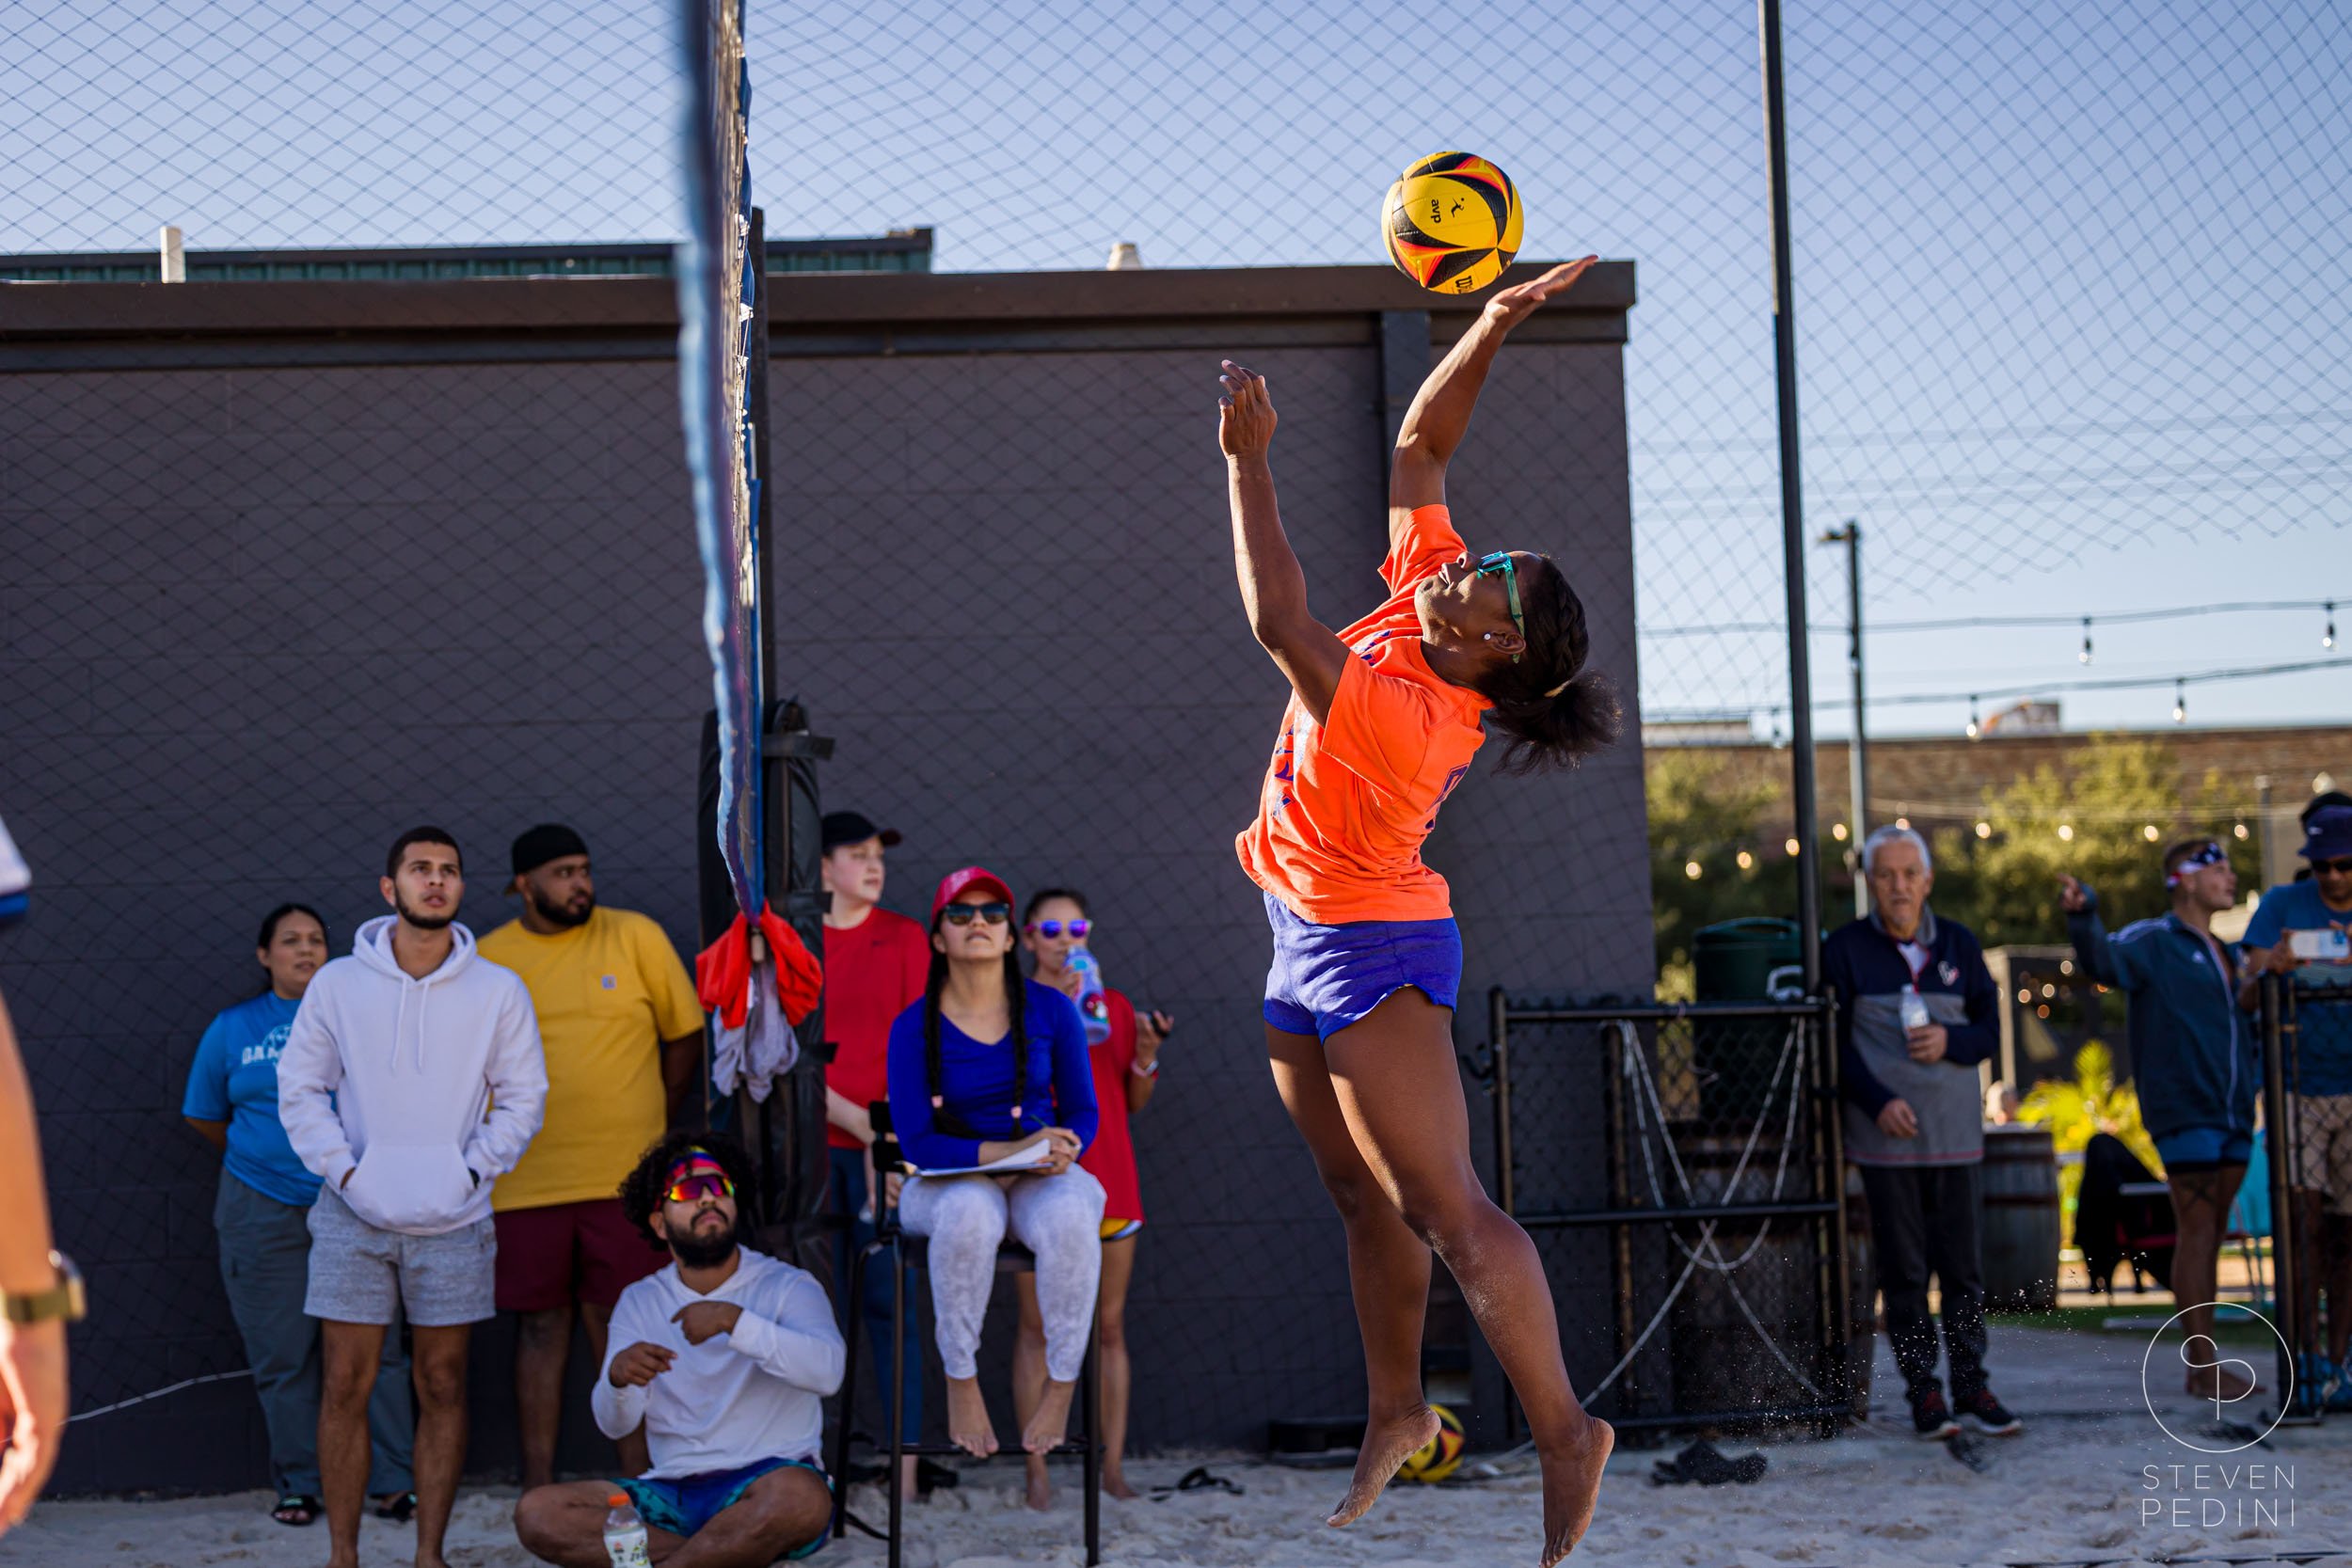 Steven Pedini Photography - Bumpy Pickle - Sand Volleyball - Houston TX - World Cup of Volleyball - 00063.jpg